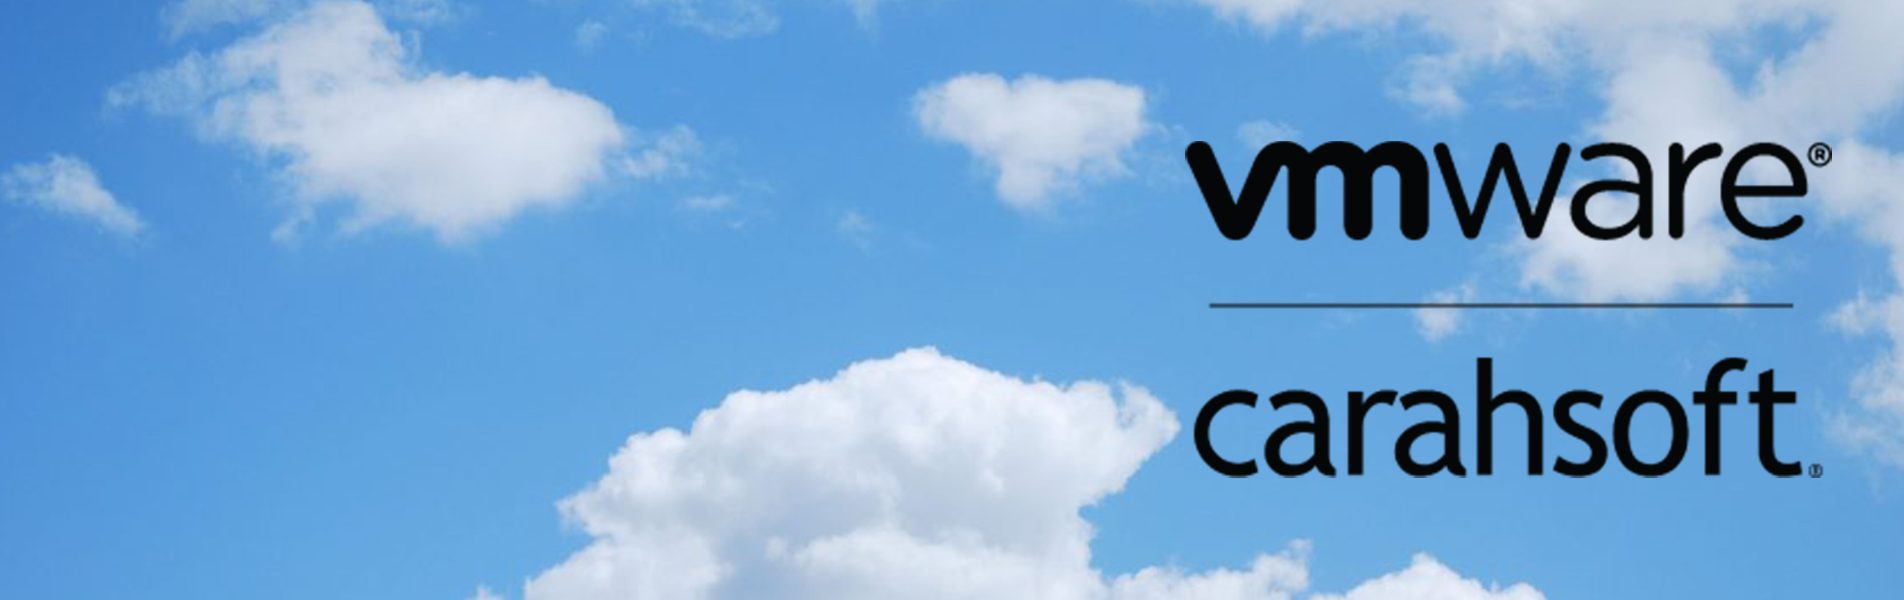 Background of blue sky and clouds with VMWare and Carahsoft logos